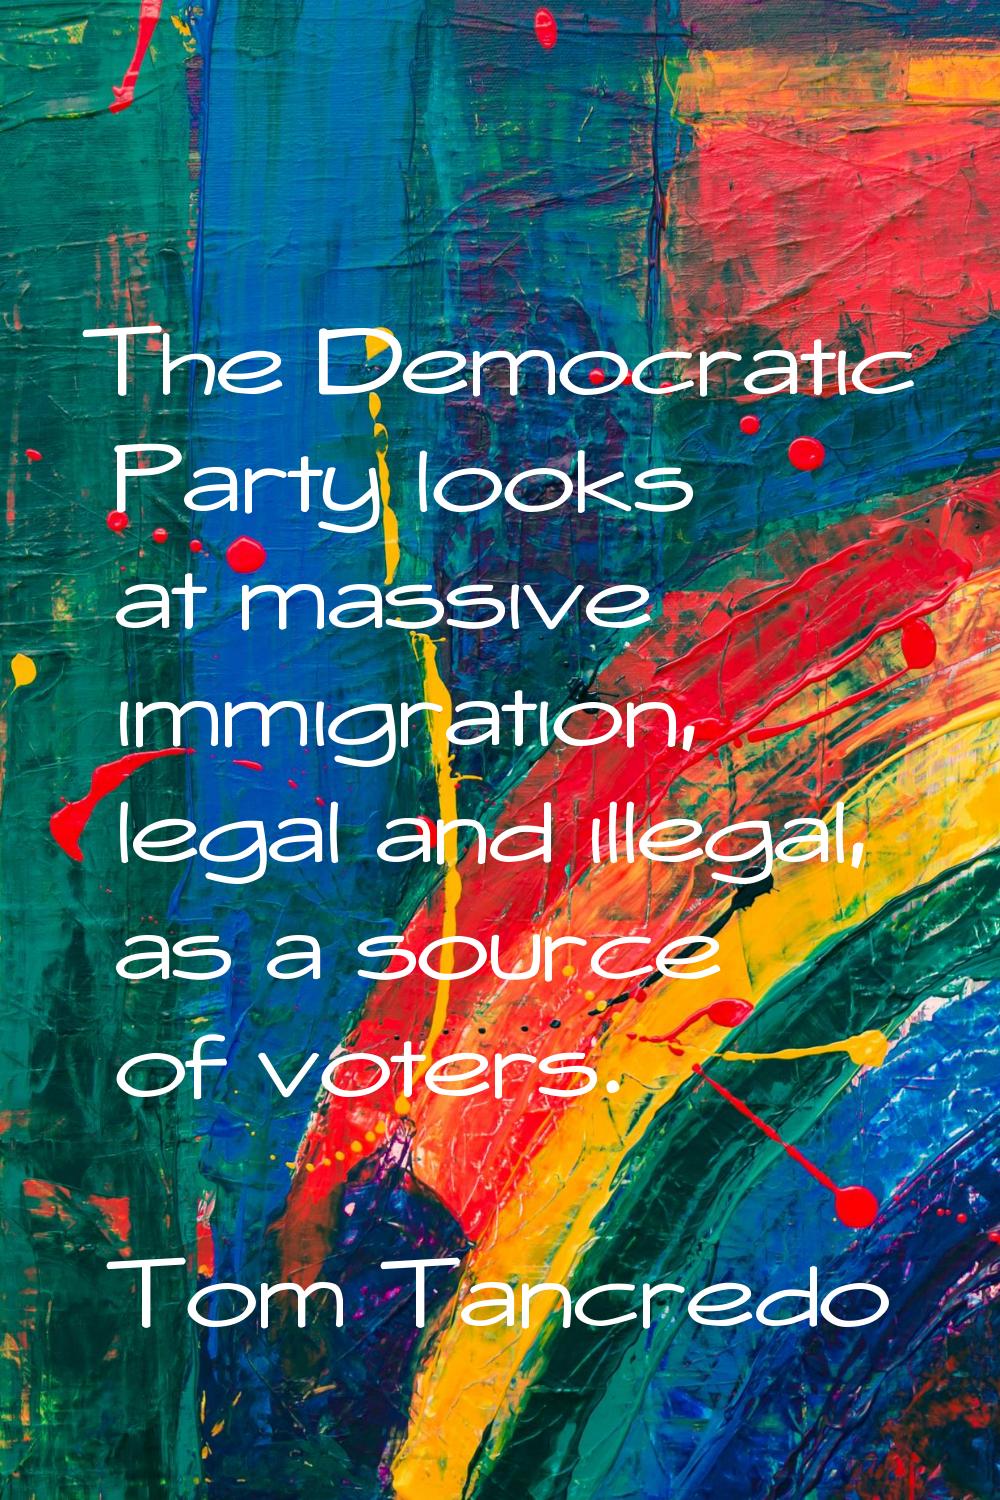 The Democratic Party looks at massive immigration, legal and illegal, as a source of voters.